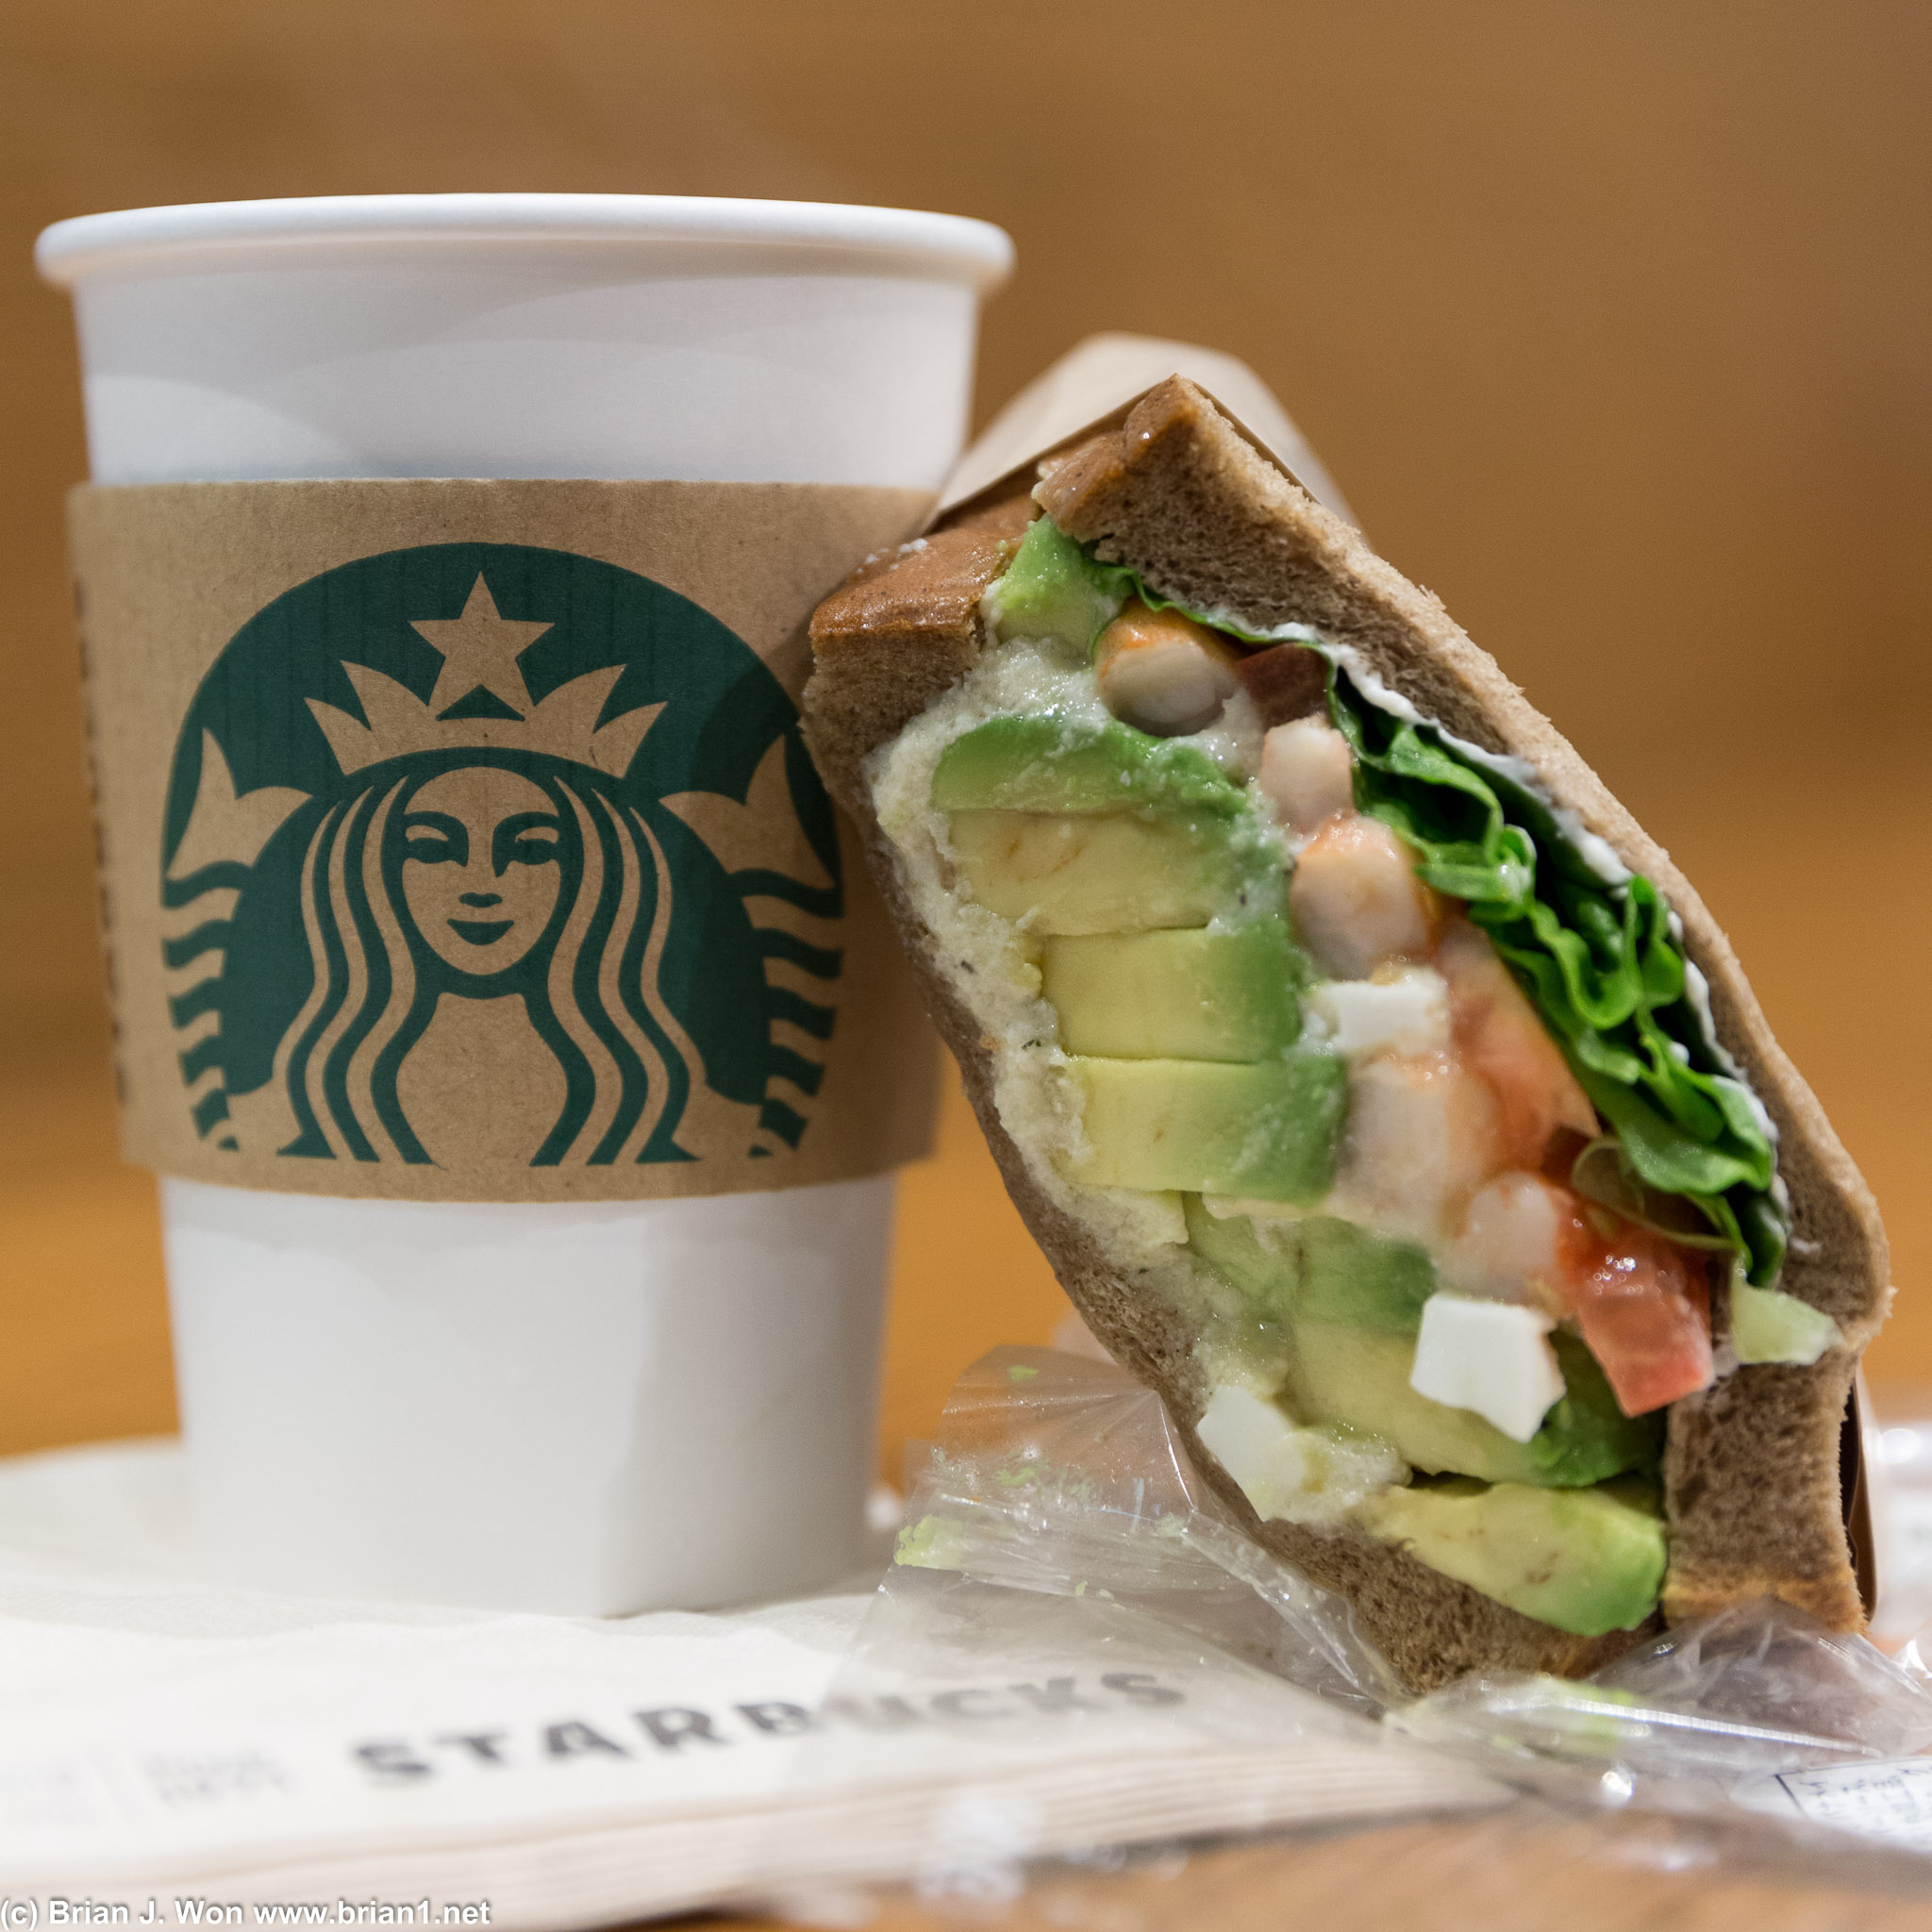 Sometimes you need a shrimp and avocado sandwich from Starbucks.